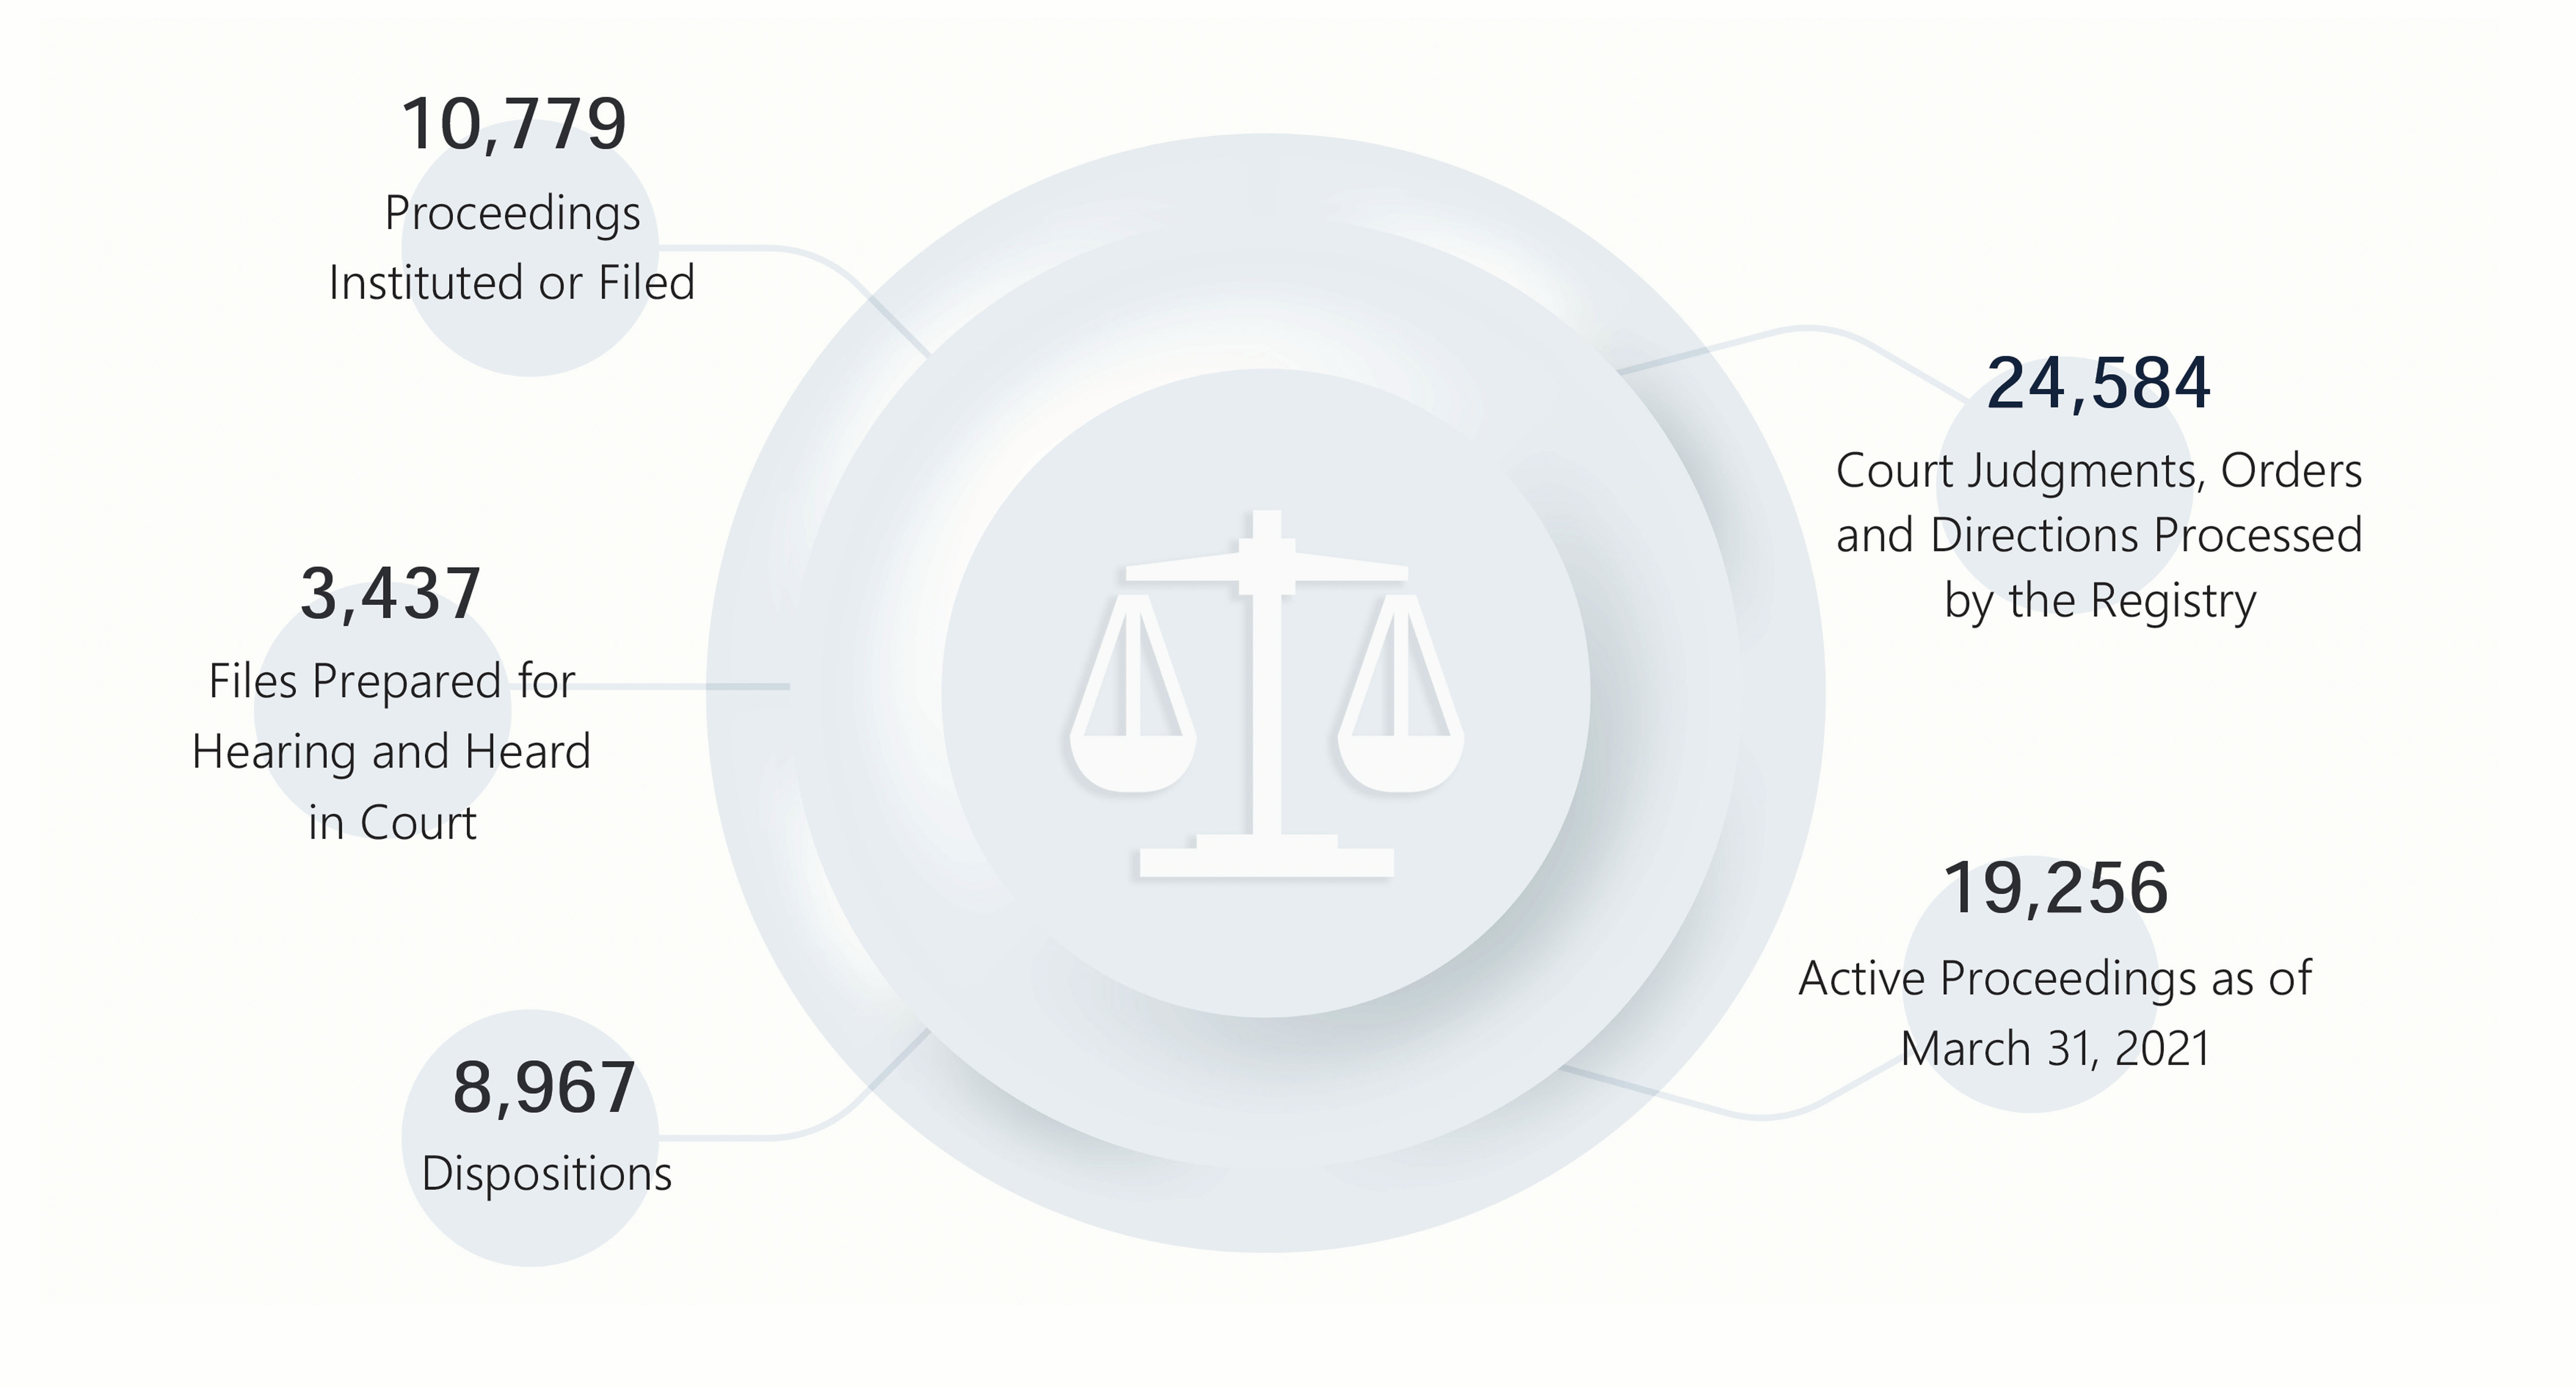 Organizational Structure of the Courts Administration Service